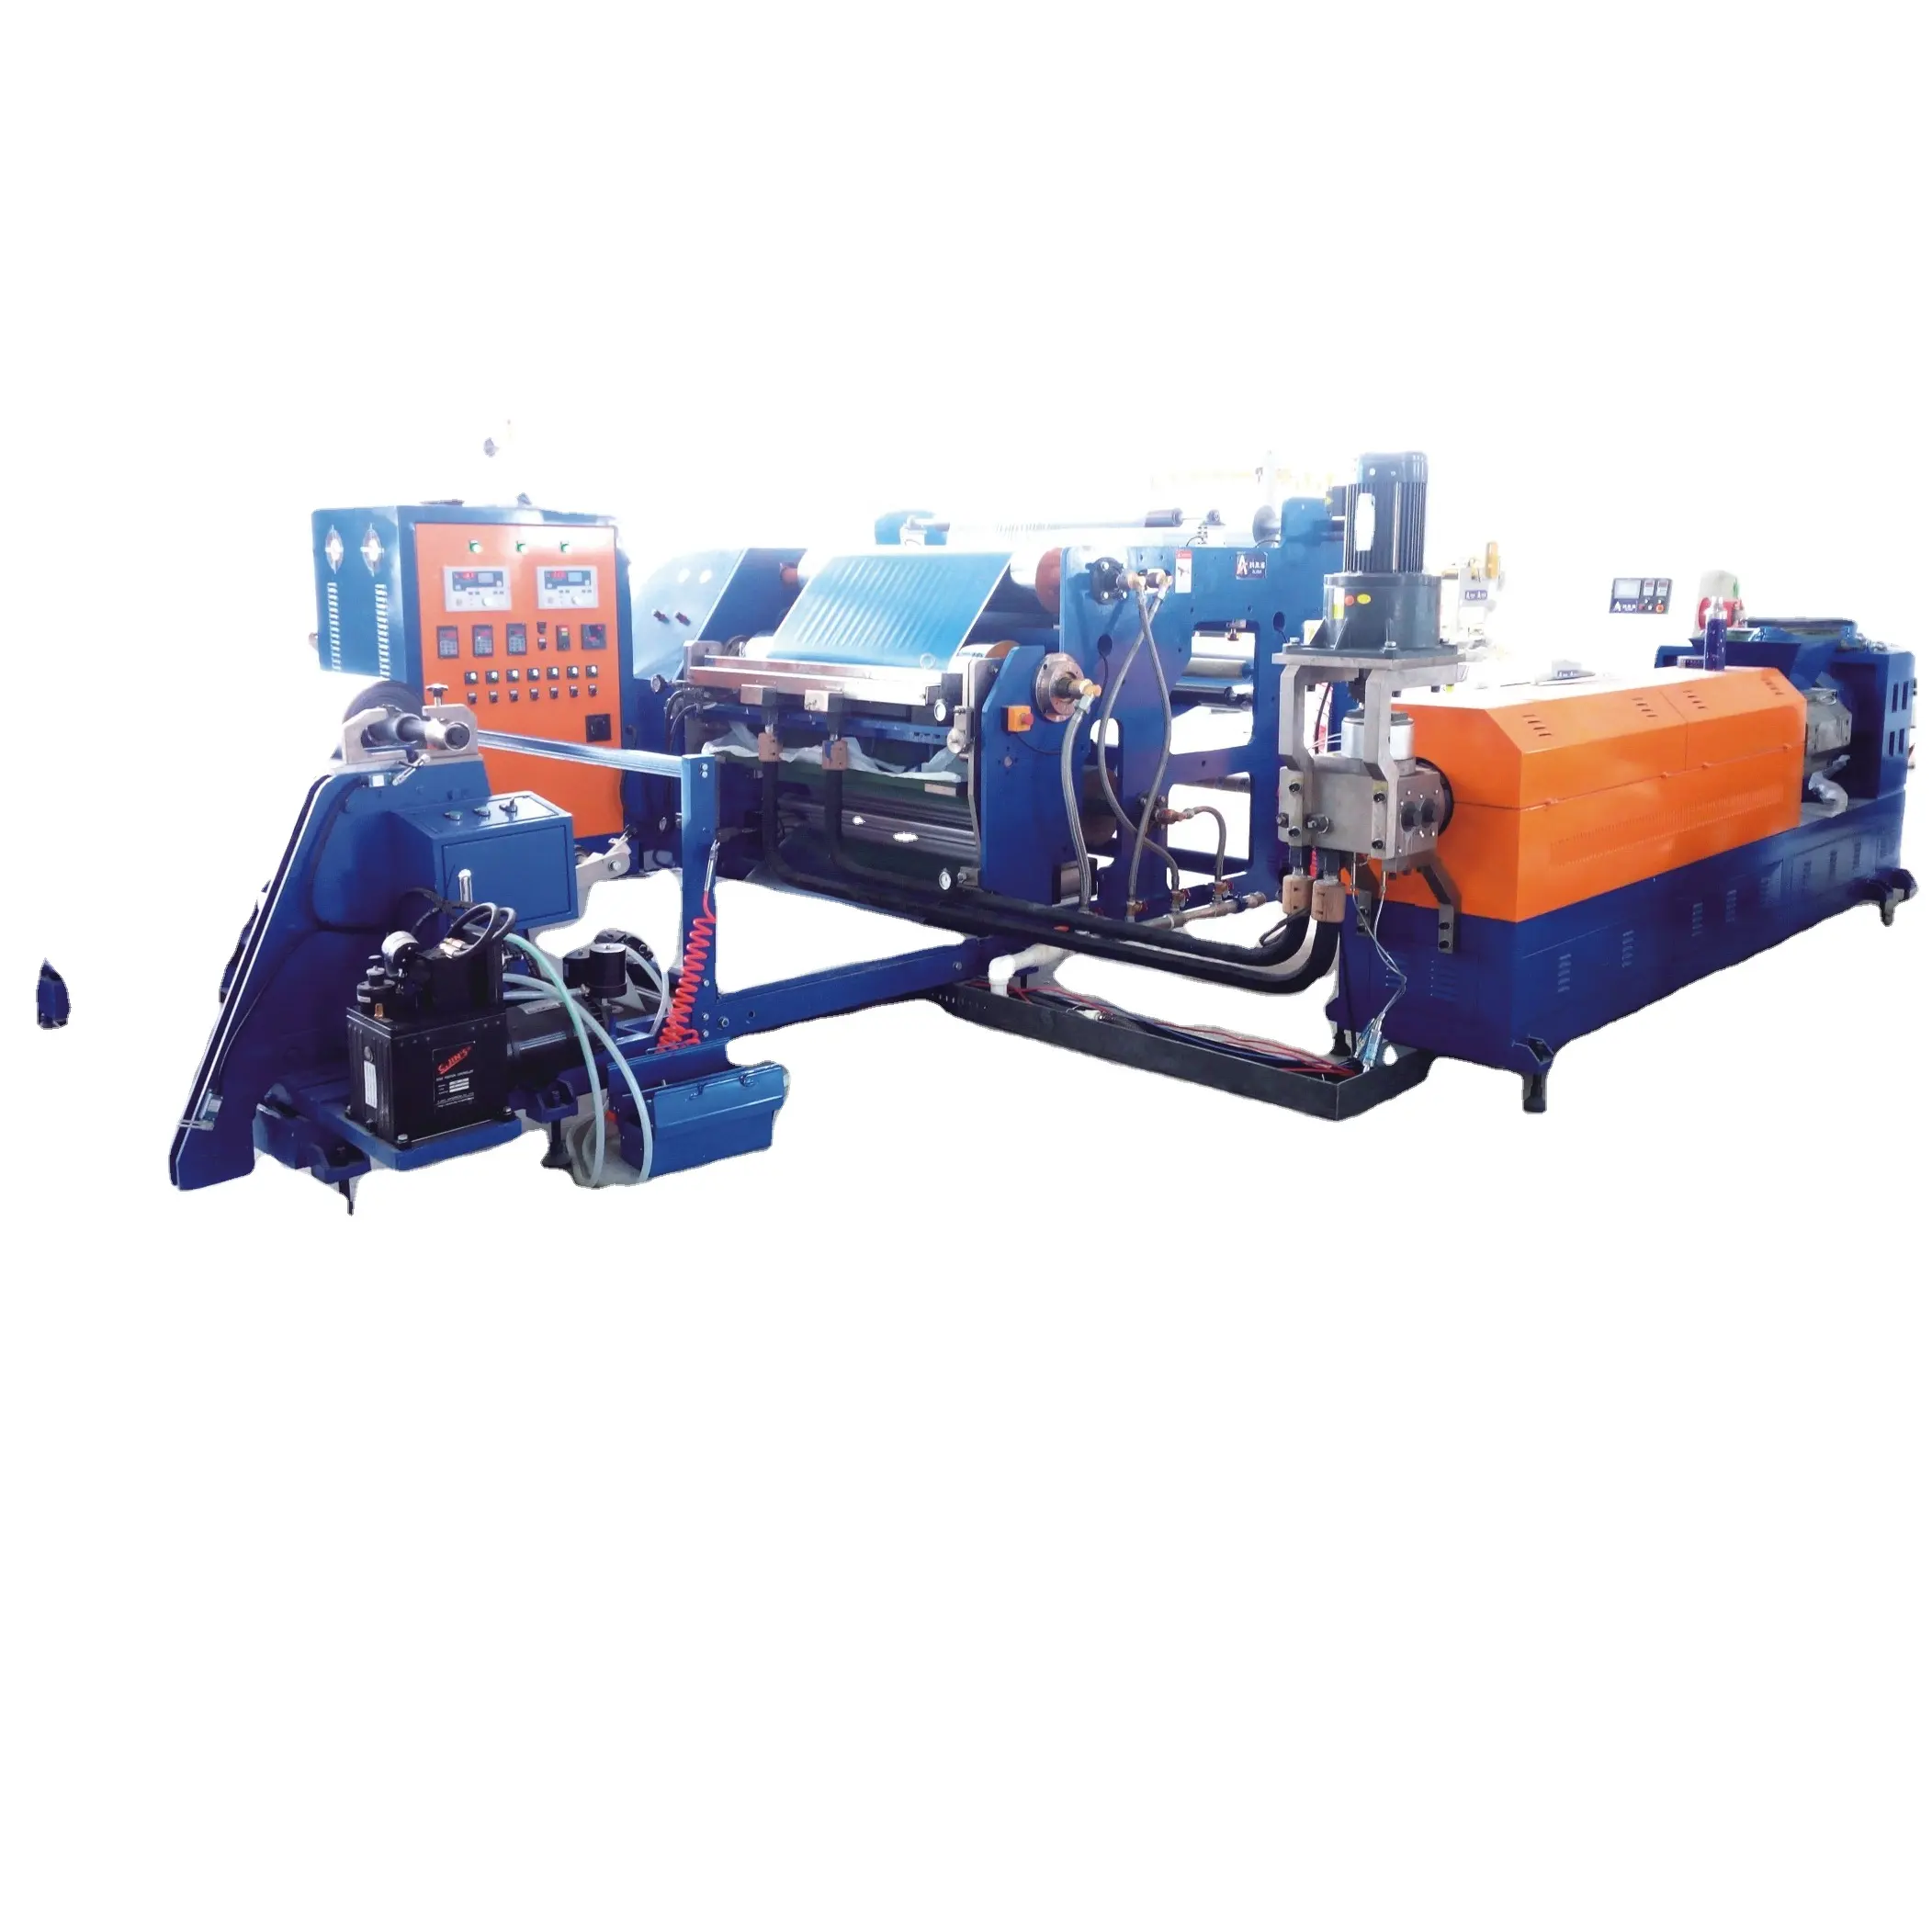 Butyl sealent tape extrusion coating machine for roof sealing and waterproofing